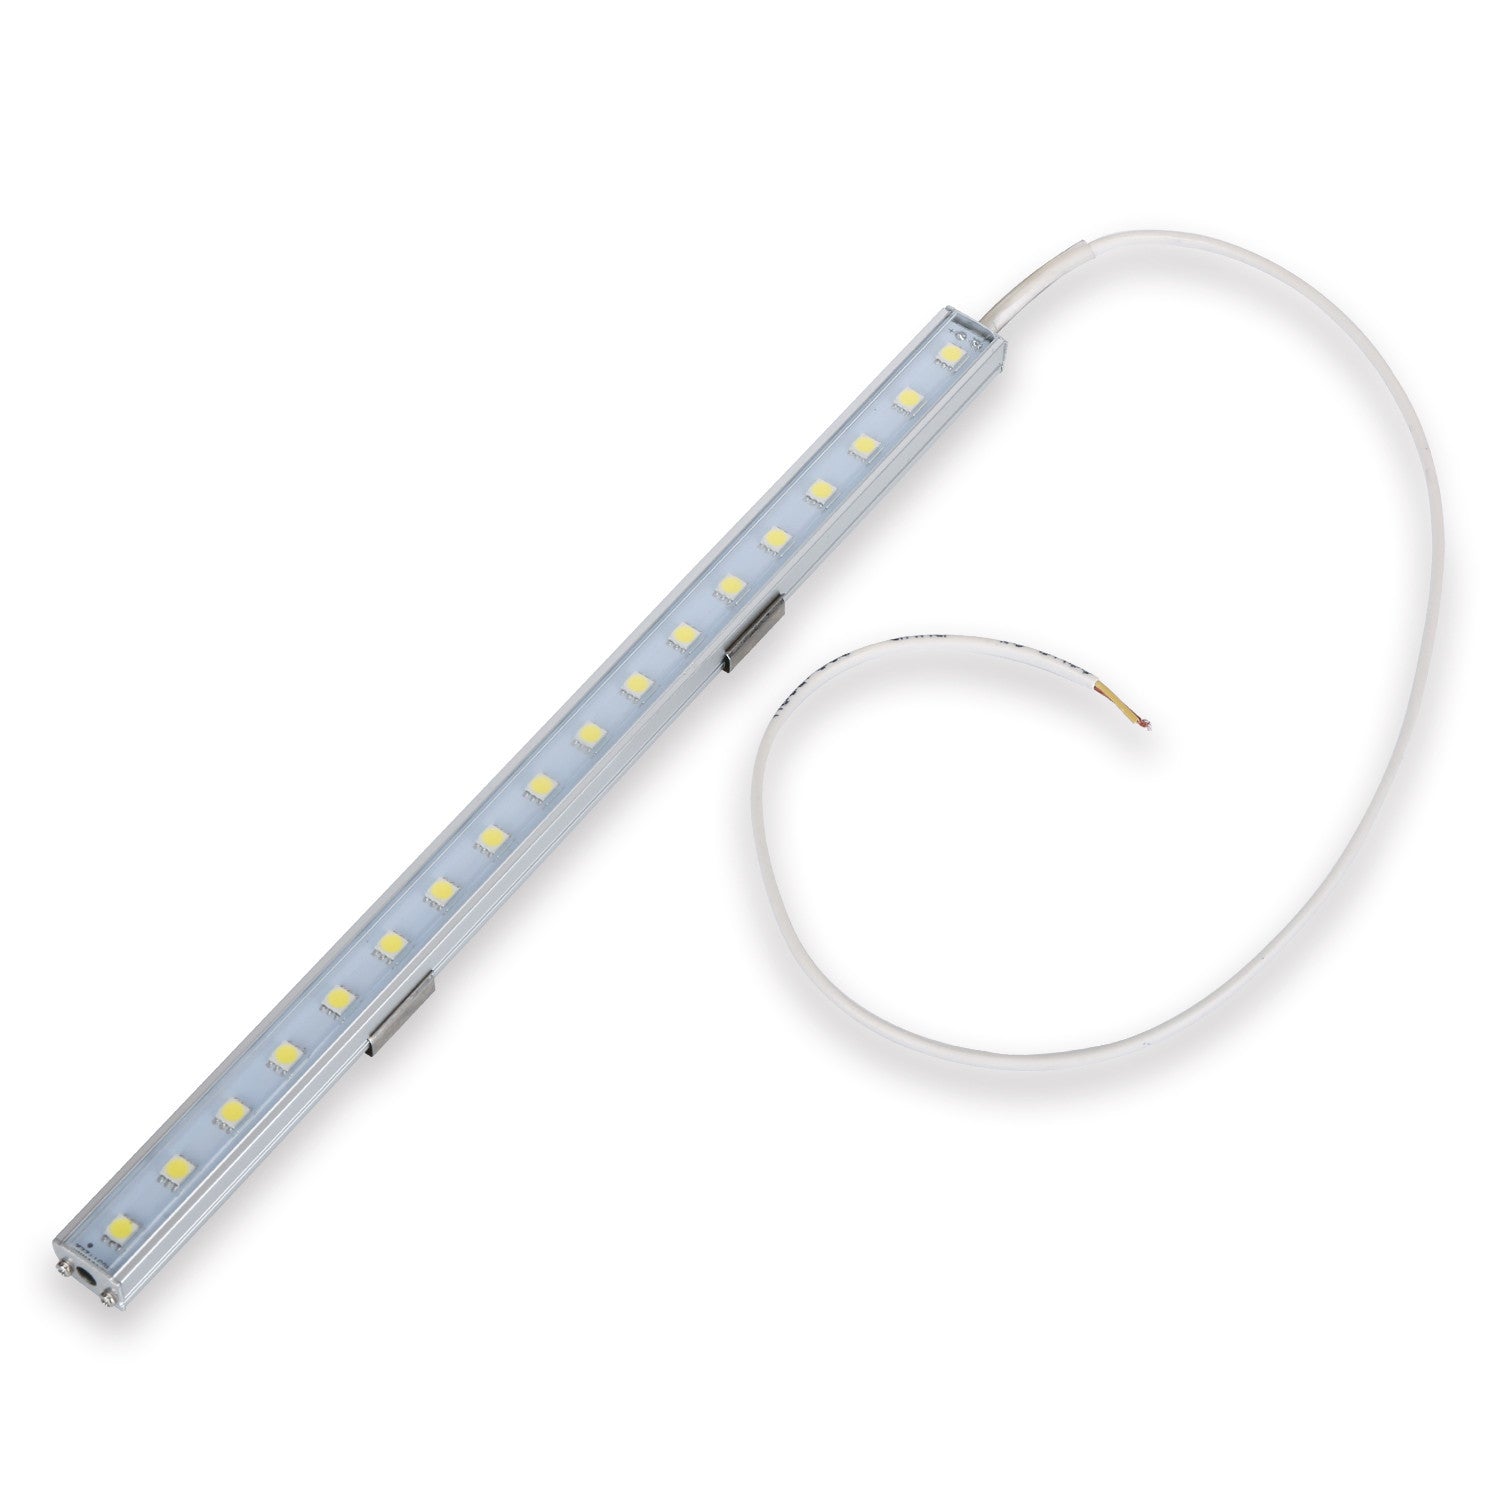 12 LED Hard Strip - Rugged, Durable And Long Lifetime